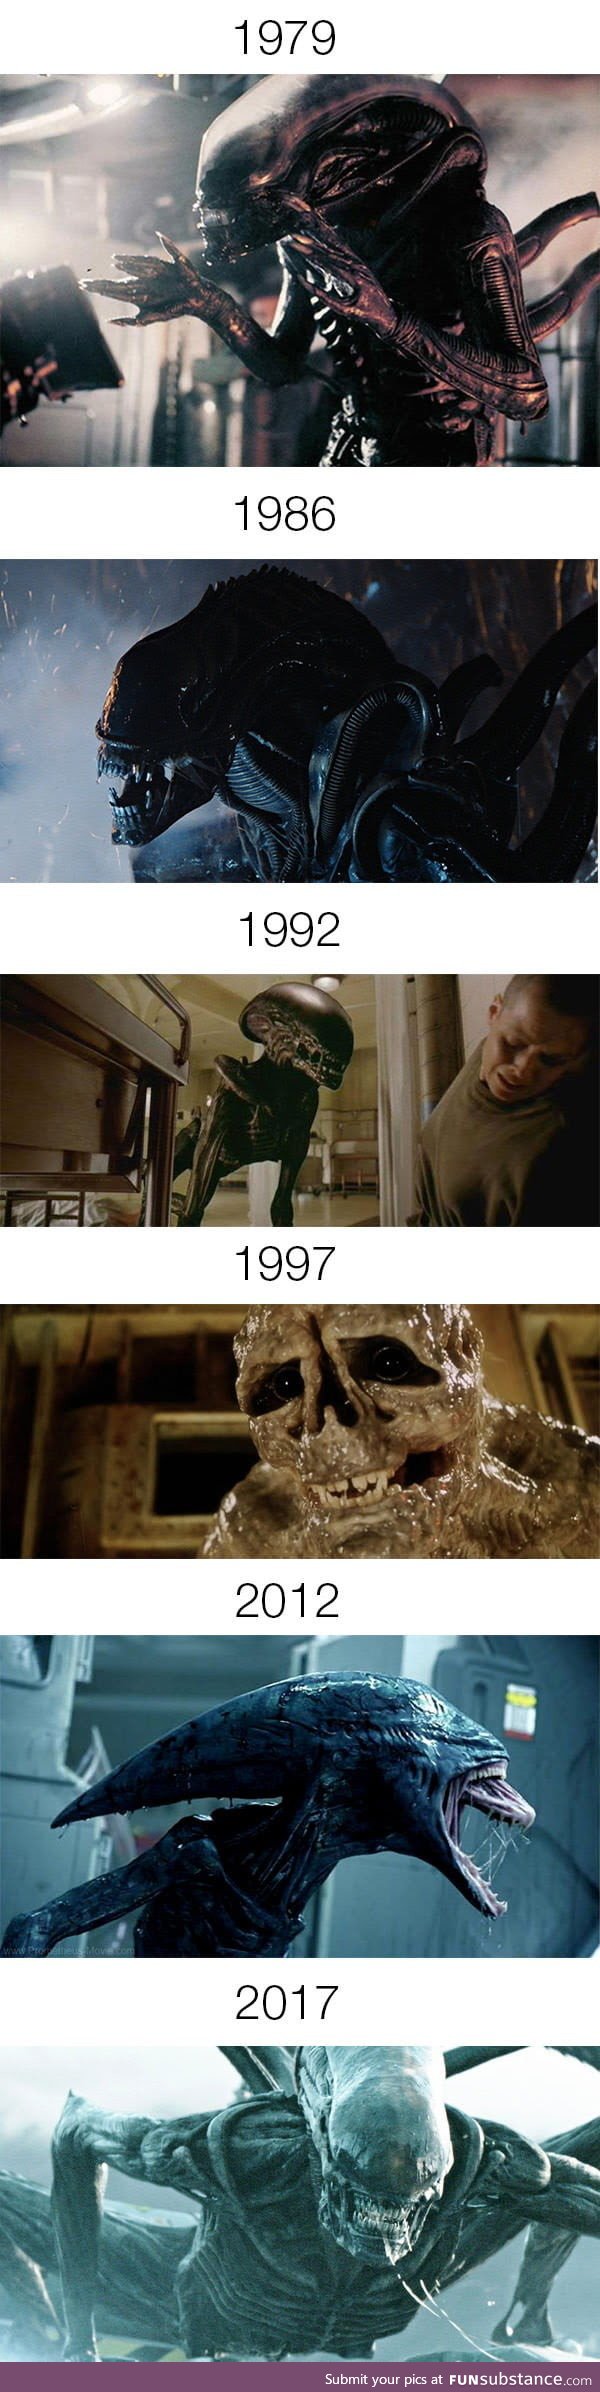 Transformation of the alien